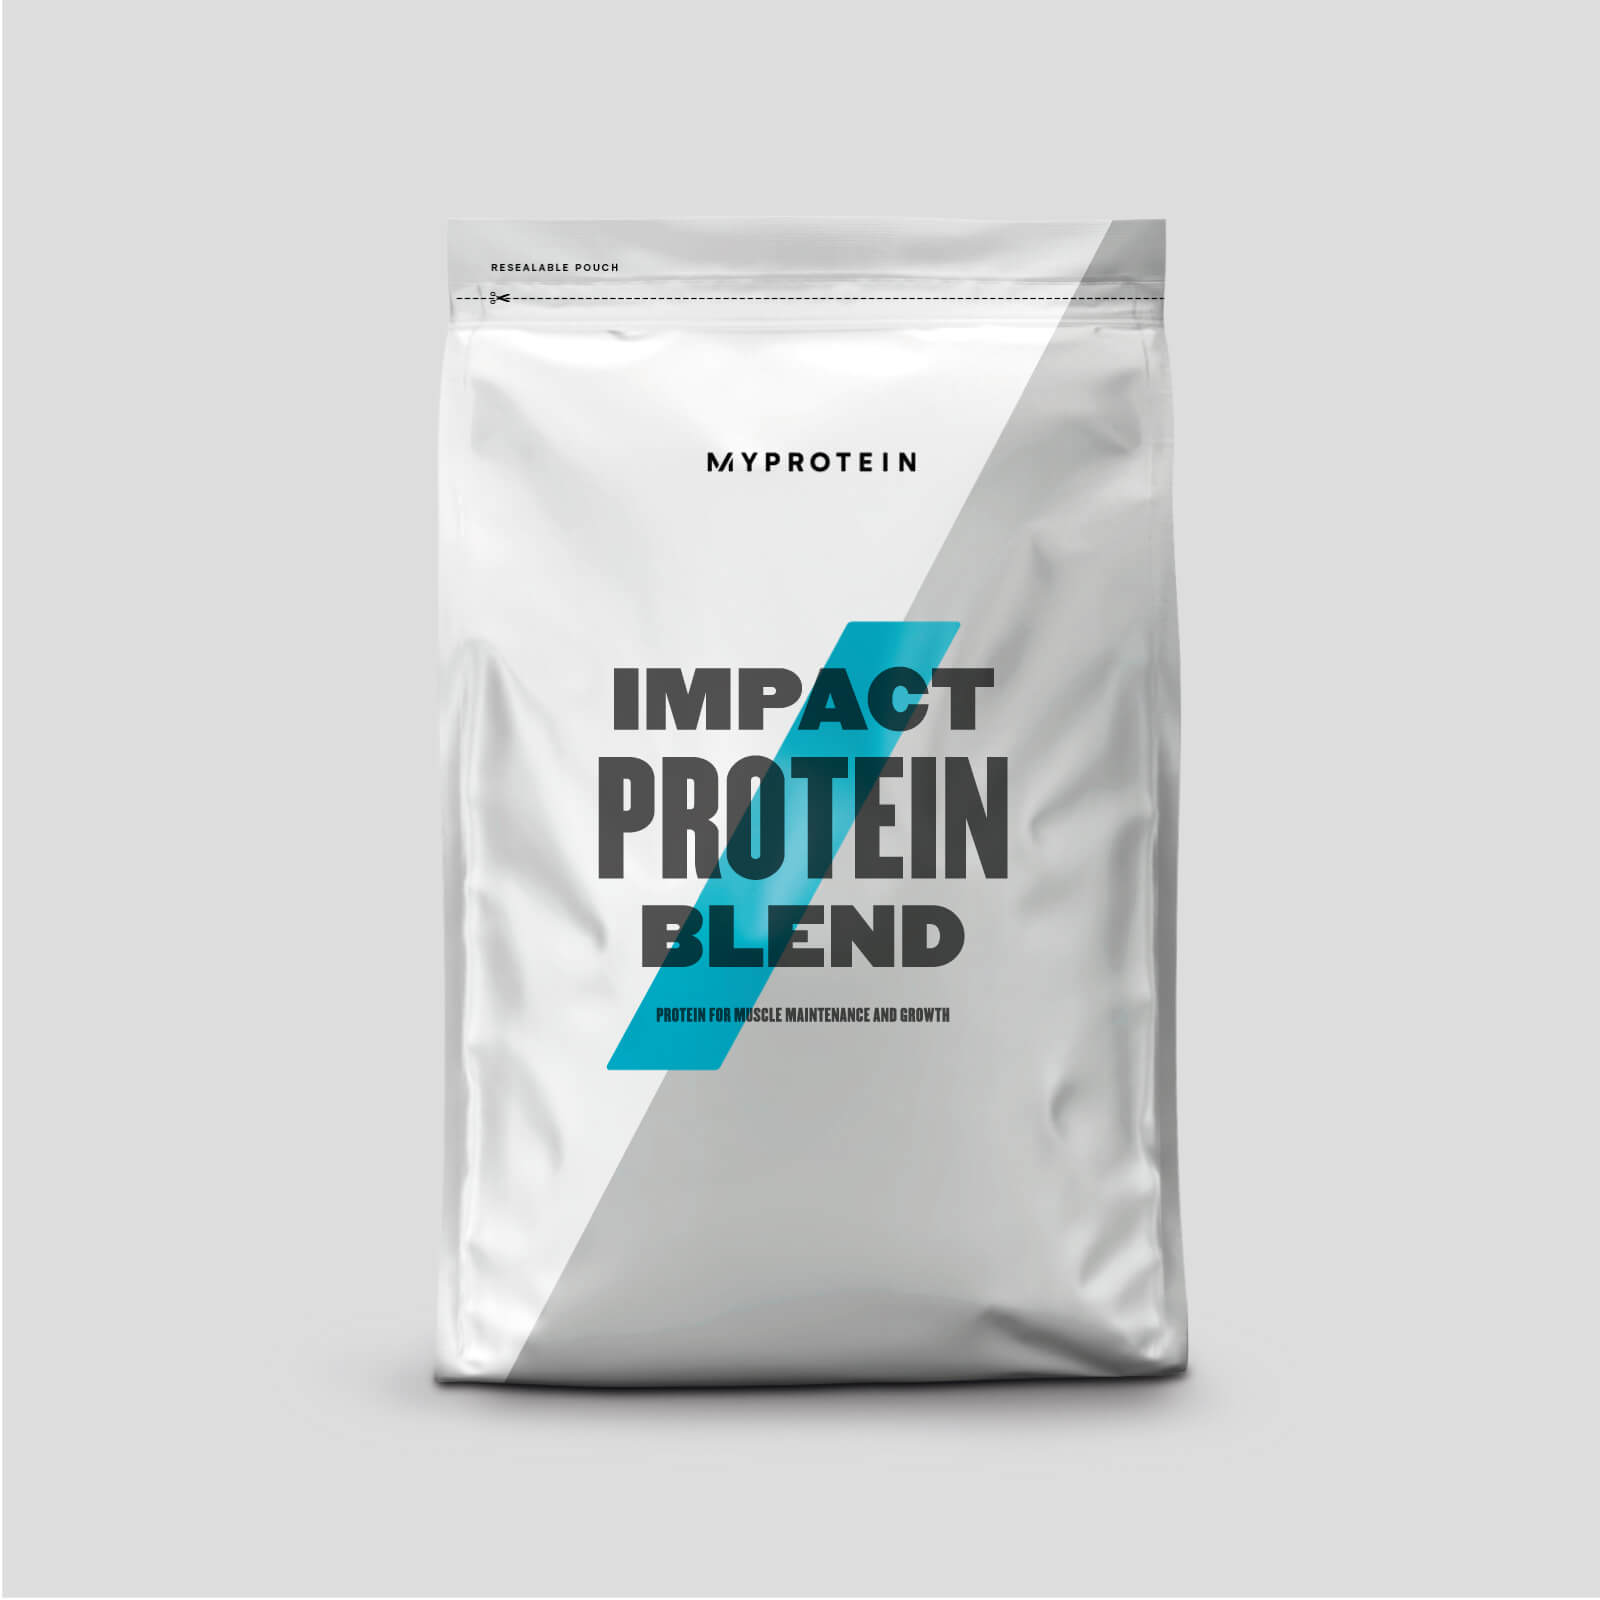 Impact Protein Blend - 10servings - Strawberry Cream